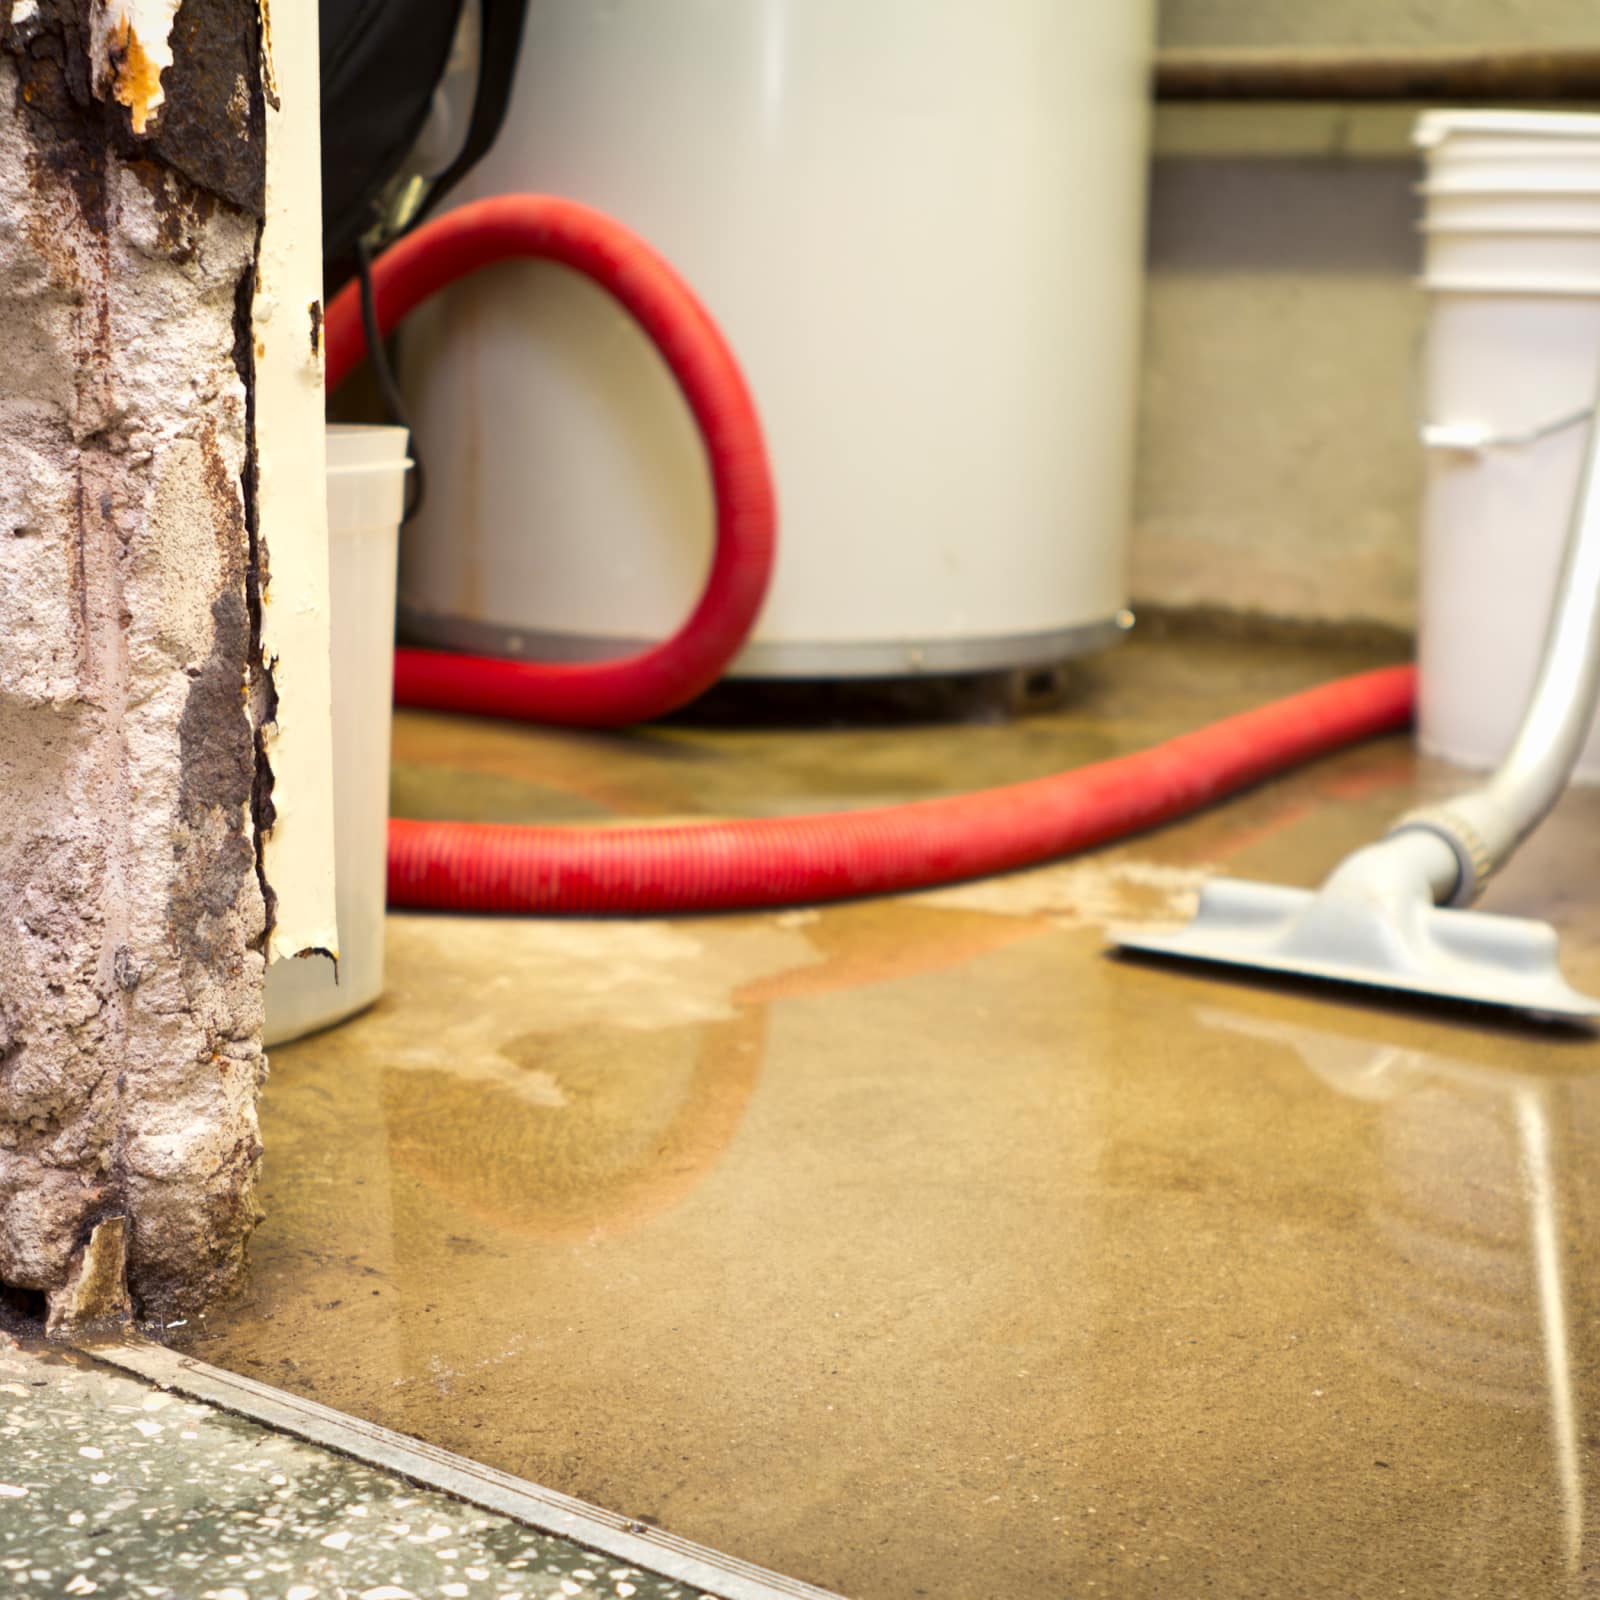 Property Owner Vs. Tenants: Who is Responsible for Plumbing System?